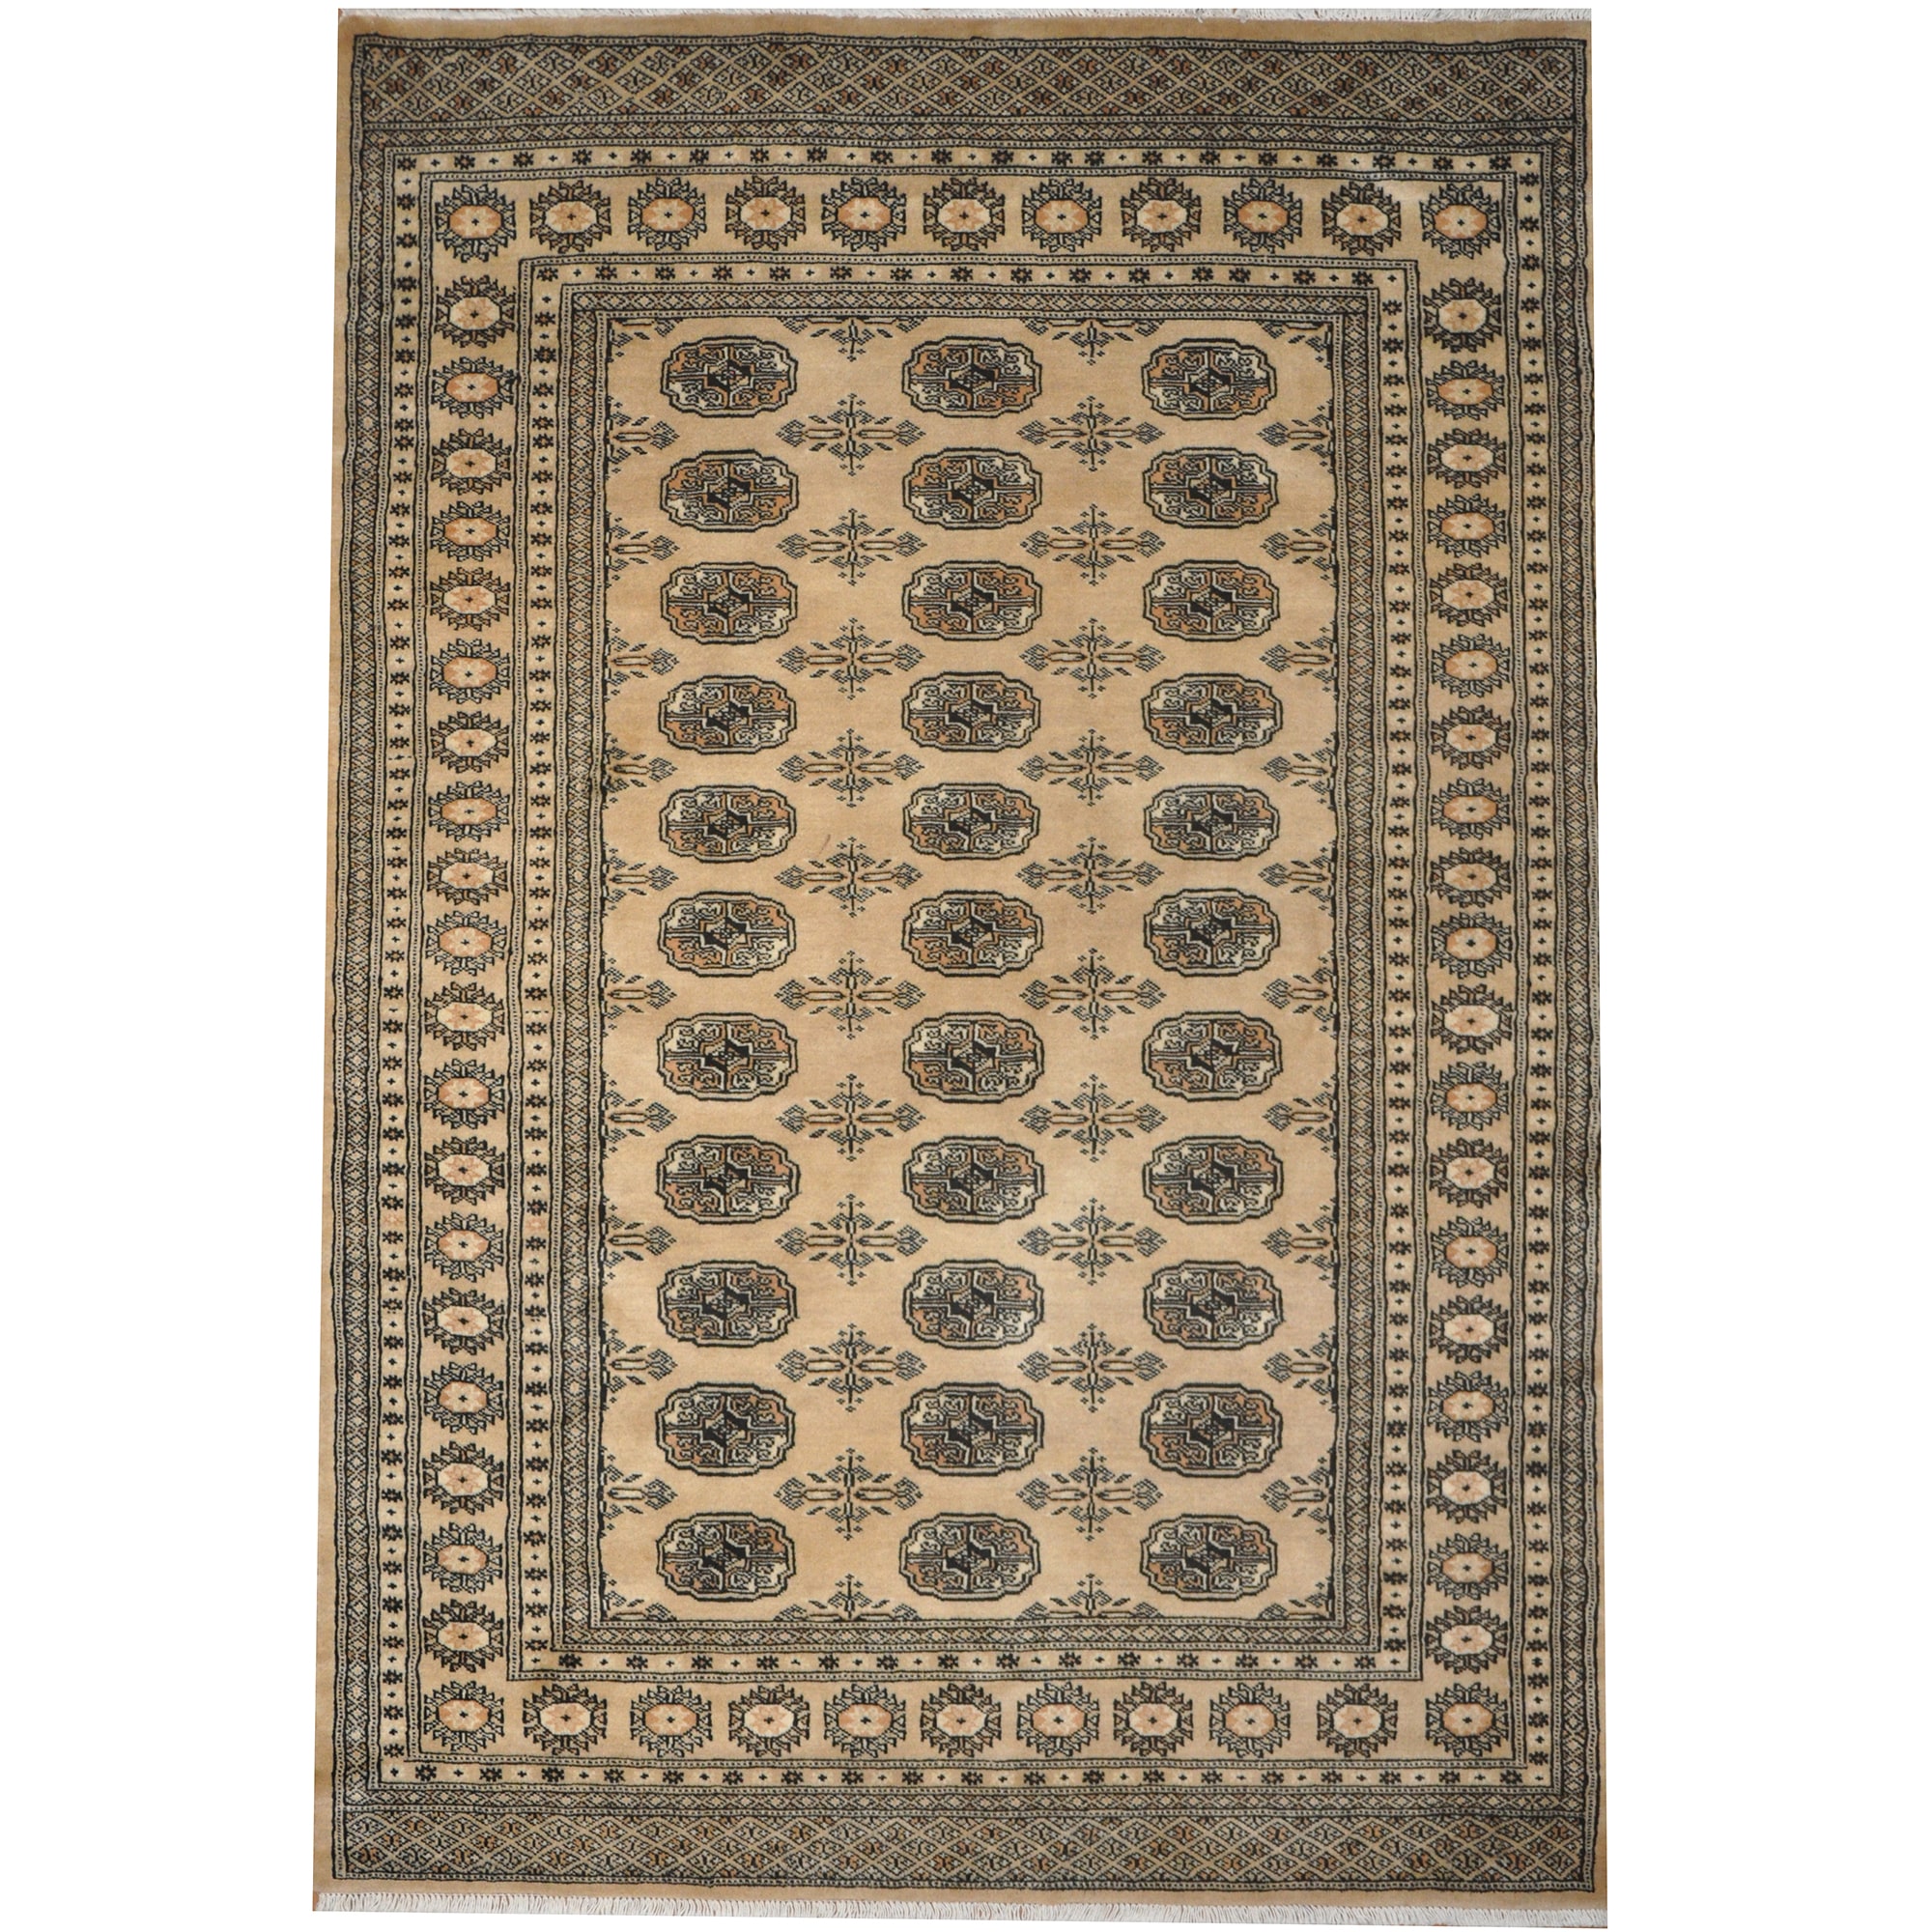 Stani Hand Knotted Bokhara Wool Rug 4 7 X 6 8 Herat Oriental Rugs